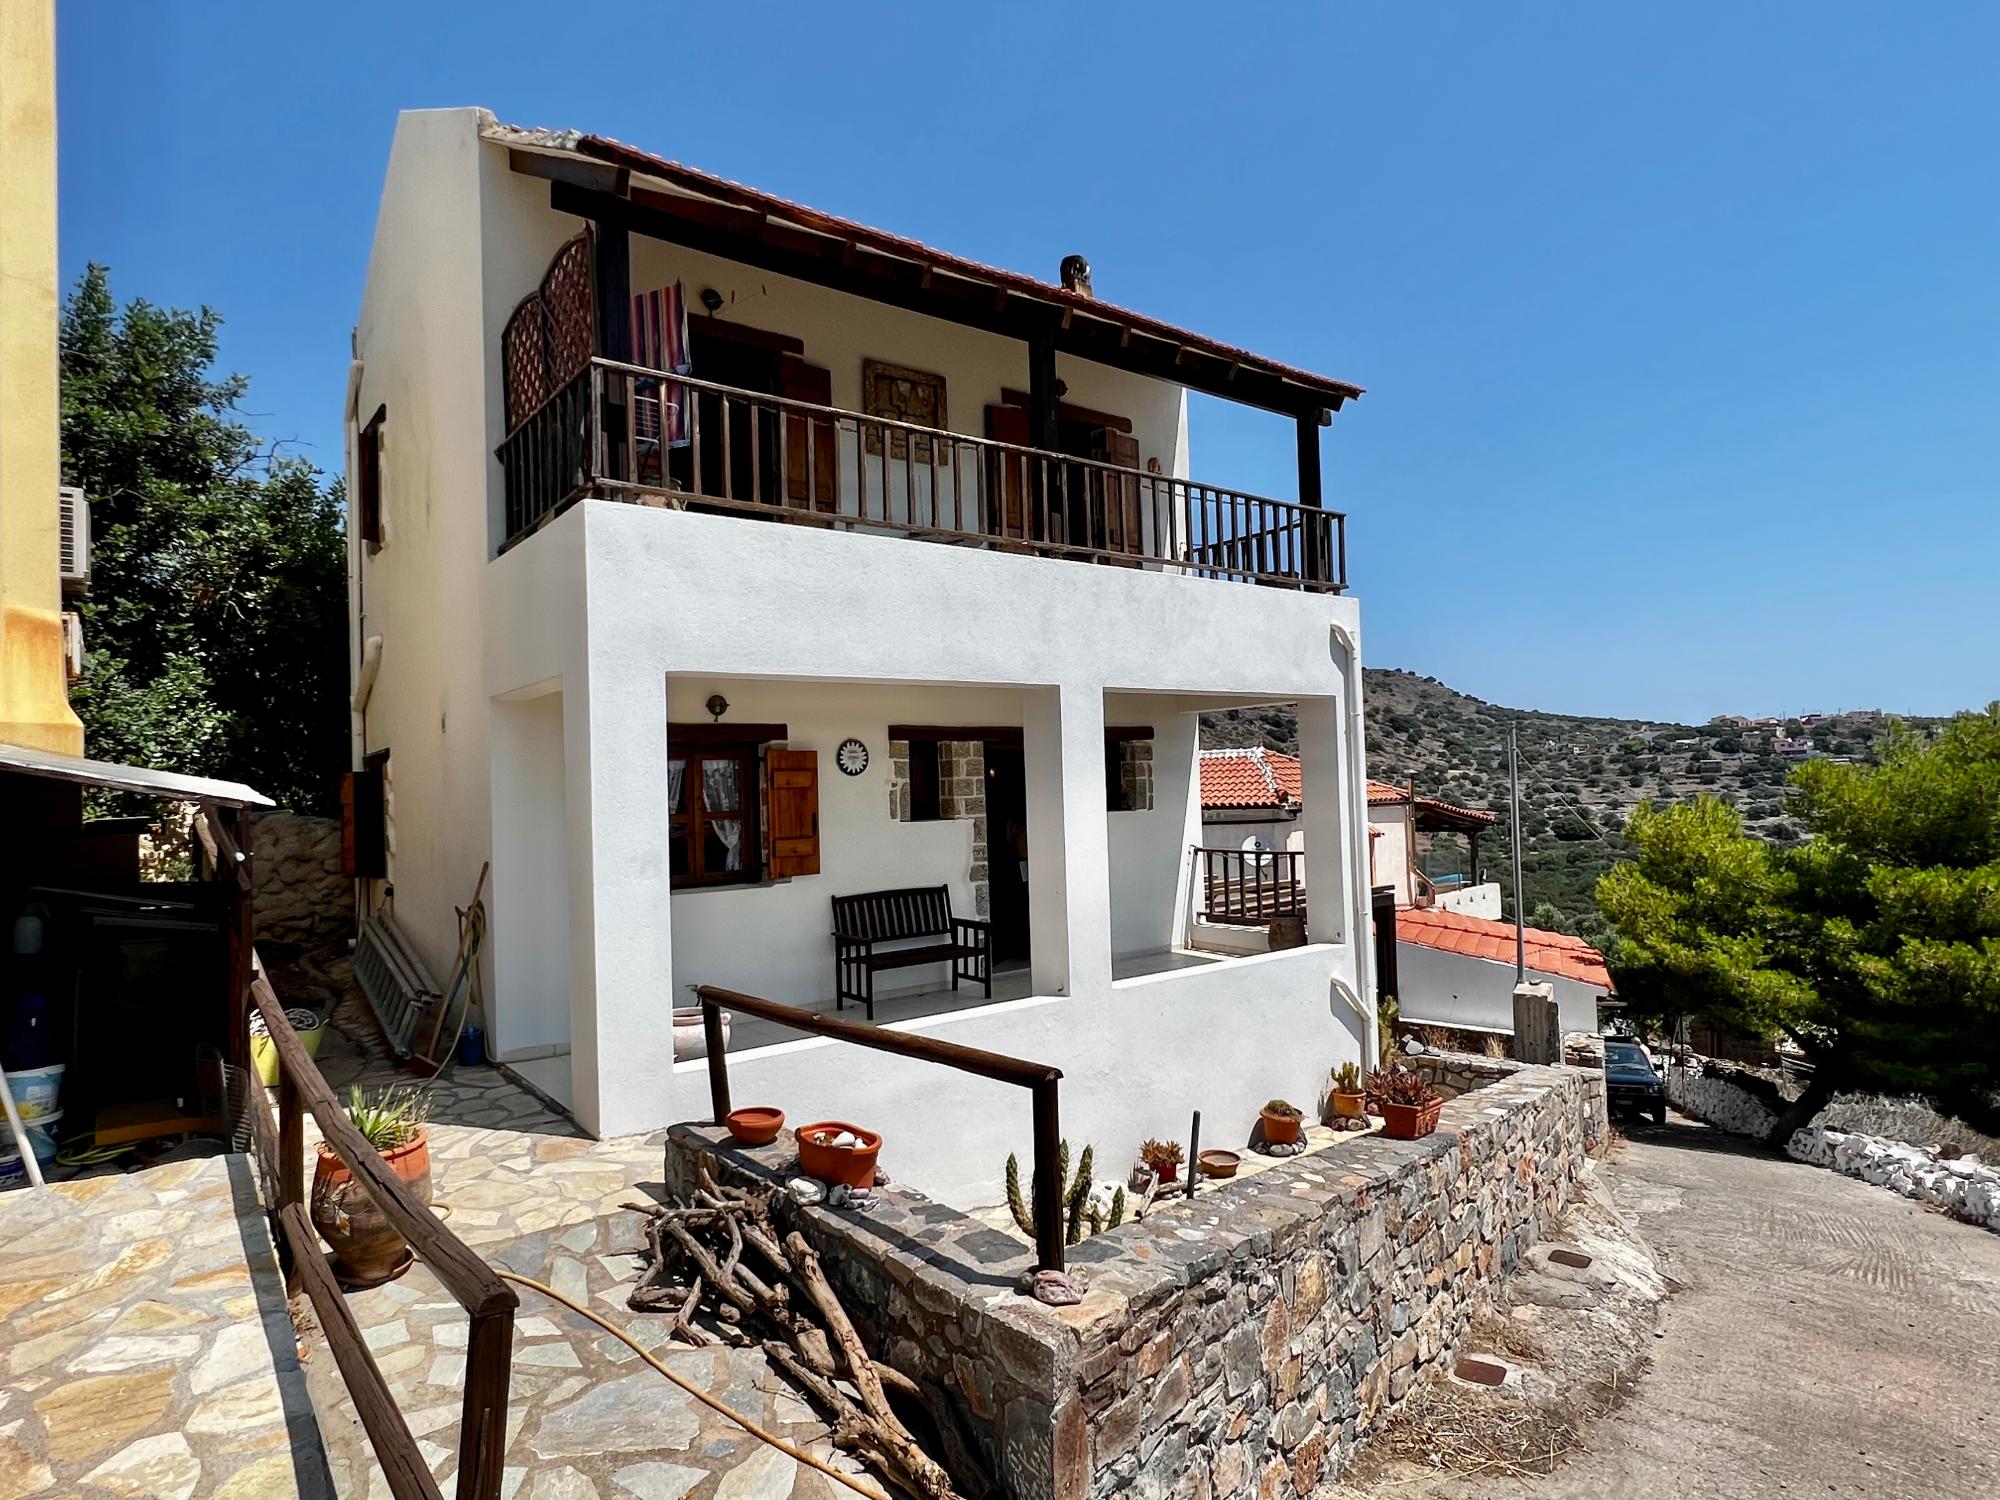 Detached Two bedroom  house in traditional village near Elounda. Furnished.